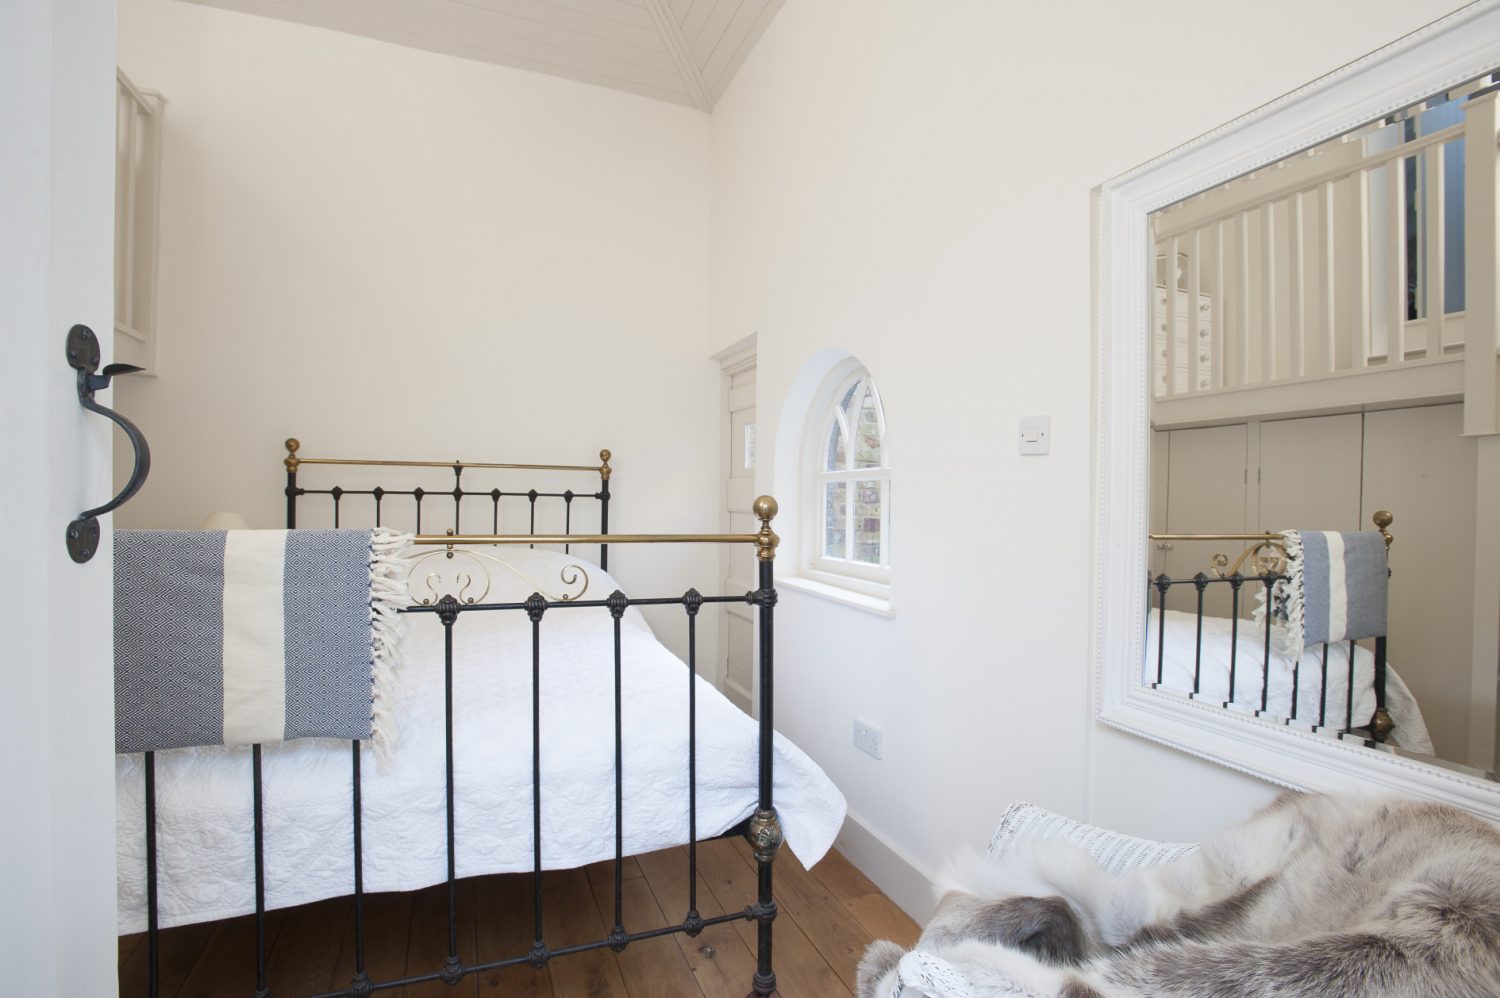 The original shed has been converted into a cosy white-on-white guest bedroom with a brass and iron bedstead